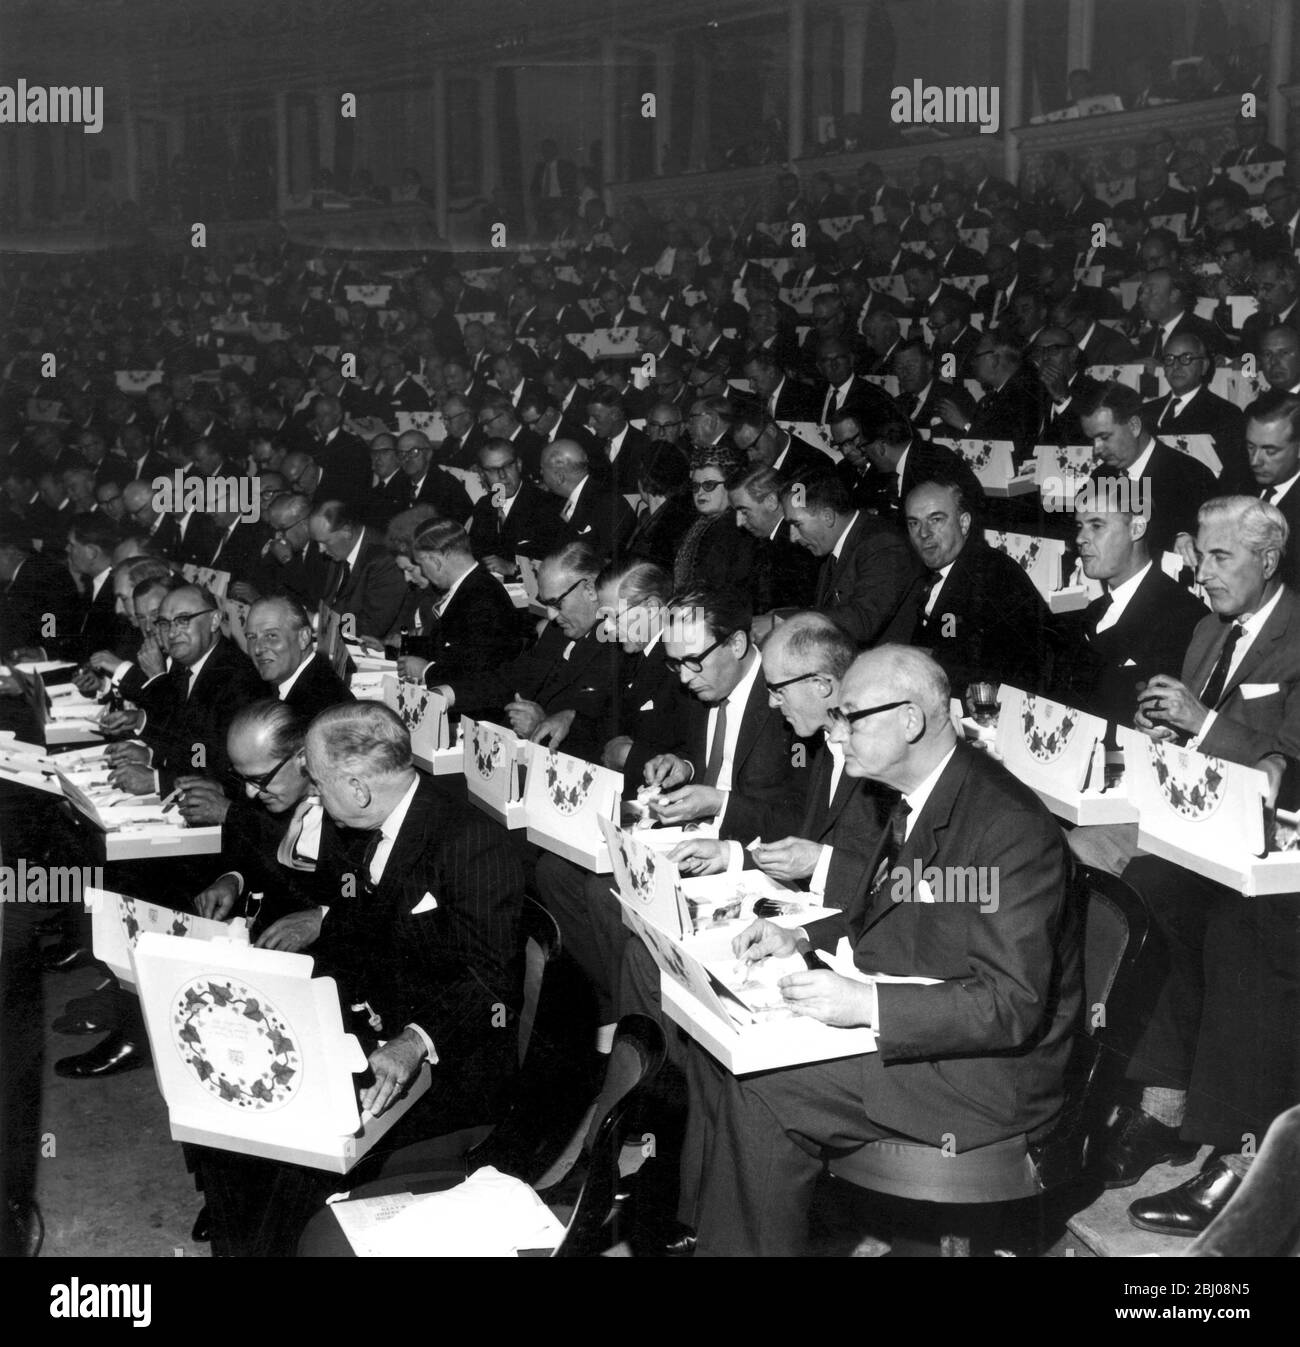 With luncheon boxes resting on their knees, some of the 5,000 company directors attending today's annual conference of the Institute of Directors in London's Royal Albert Hall, partake of an informal meal during a break in the proceedings. Each luncheon box contained a plastic knife and fork, mousse de foi gras, grilled lamb cutlet, roast chicken, stilton cheese, a bottle of red wine, a plastic glass, (cup or spoon), three cigarettes, a box of matches and a toothpick and tumbler. The Duke of Edinburgh attended this morning's session of the meeting, but did not stay for lunch. - 31st October 19 Stock Photo